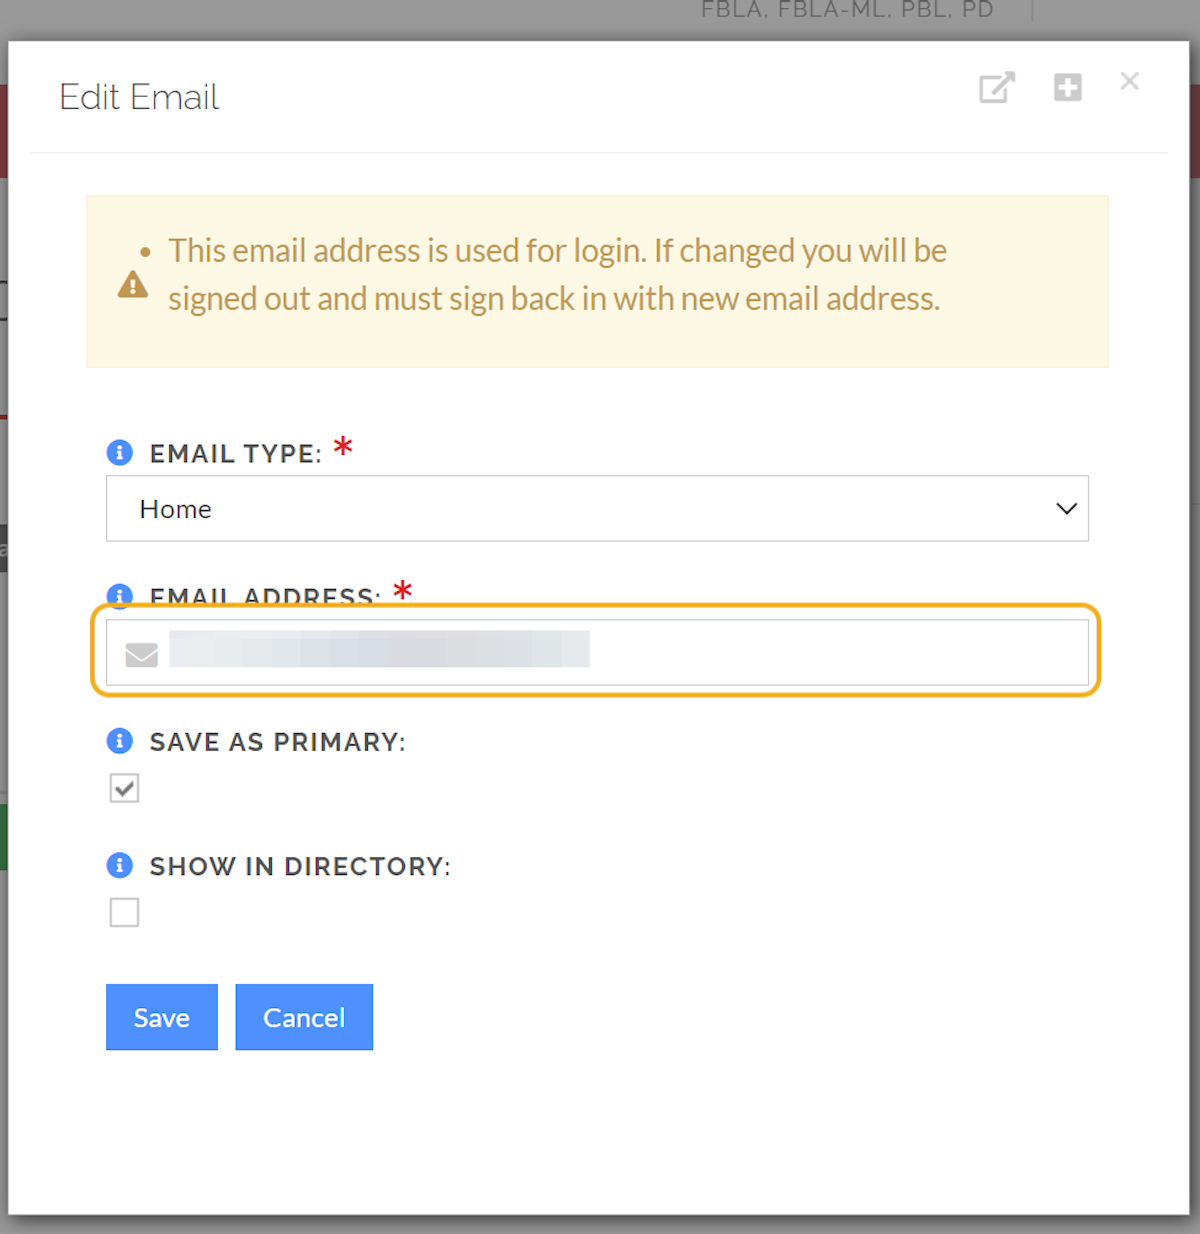 Type the correct email address into the field under email address.